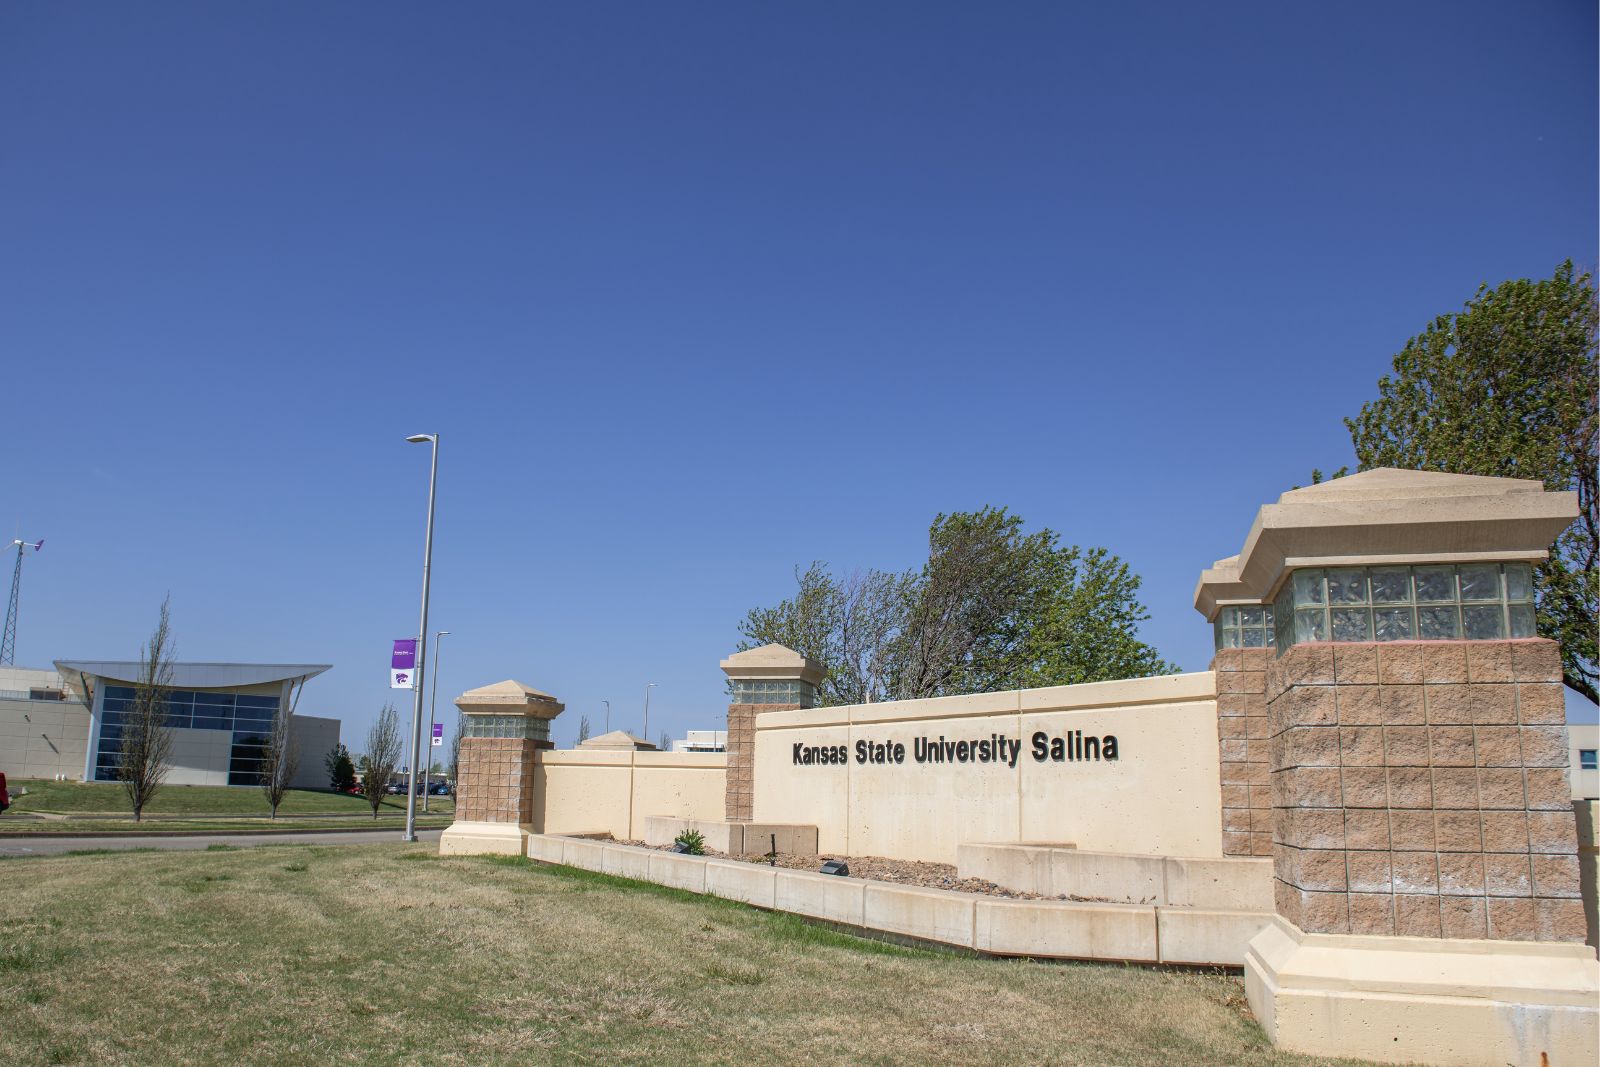 An image of the entrance to the campus of Kansas State University Salina